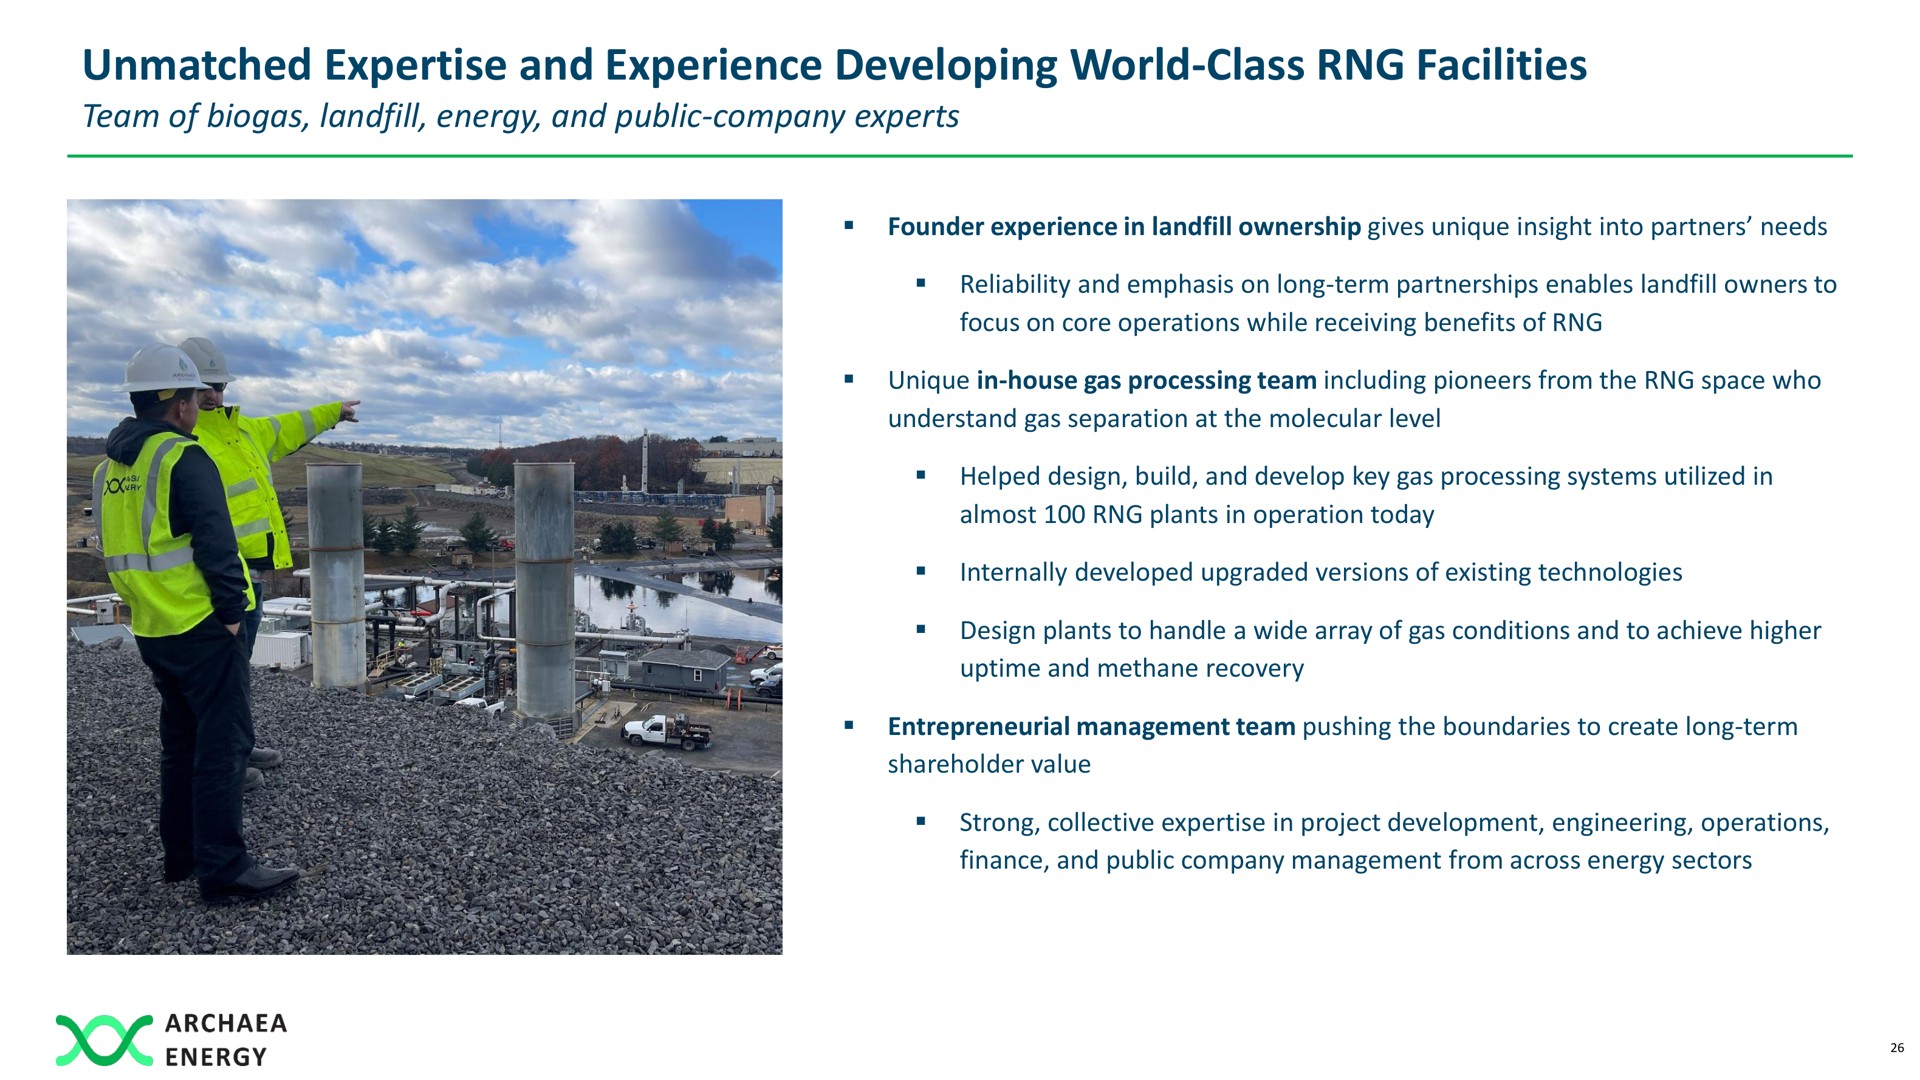 unmatched and experience developing world class facilities | Archaea Energy